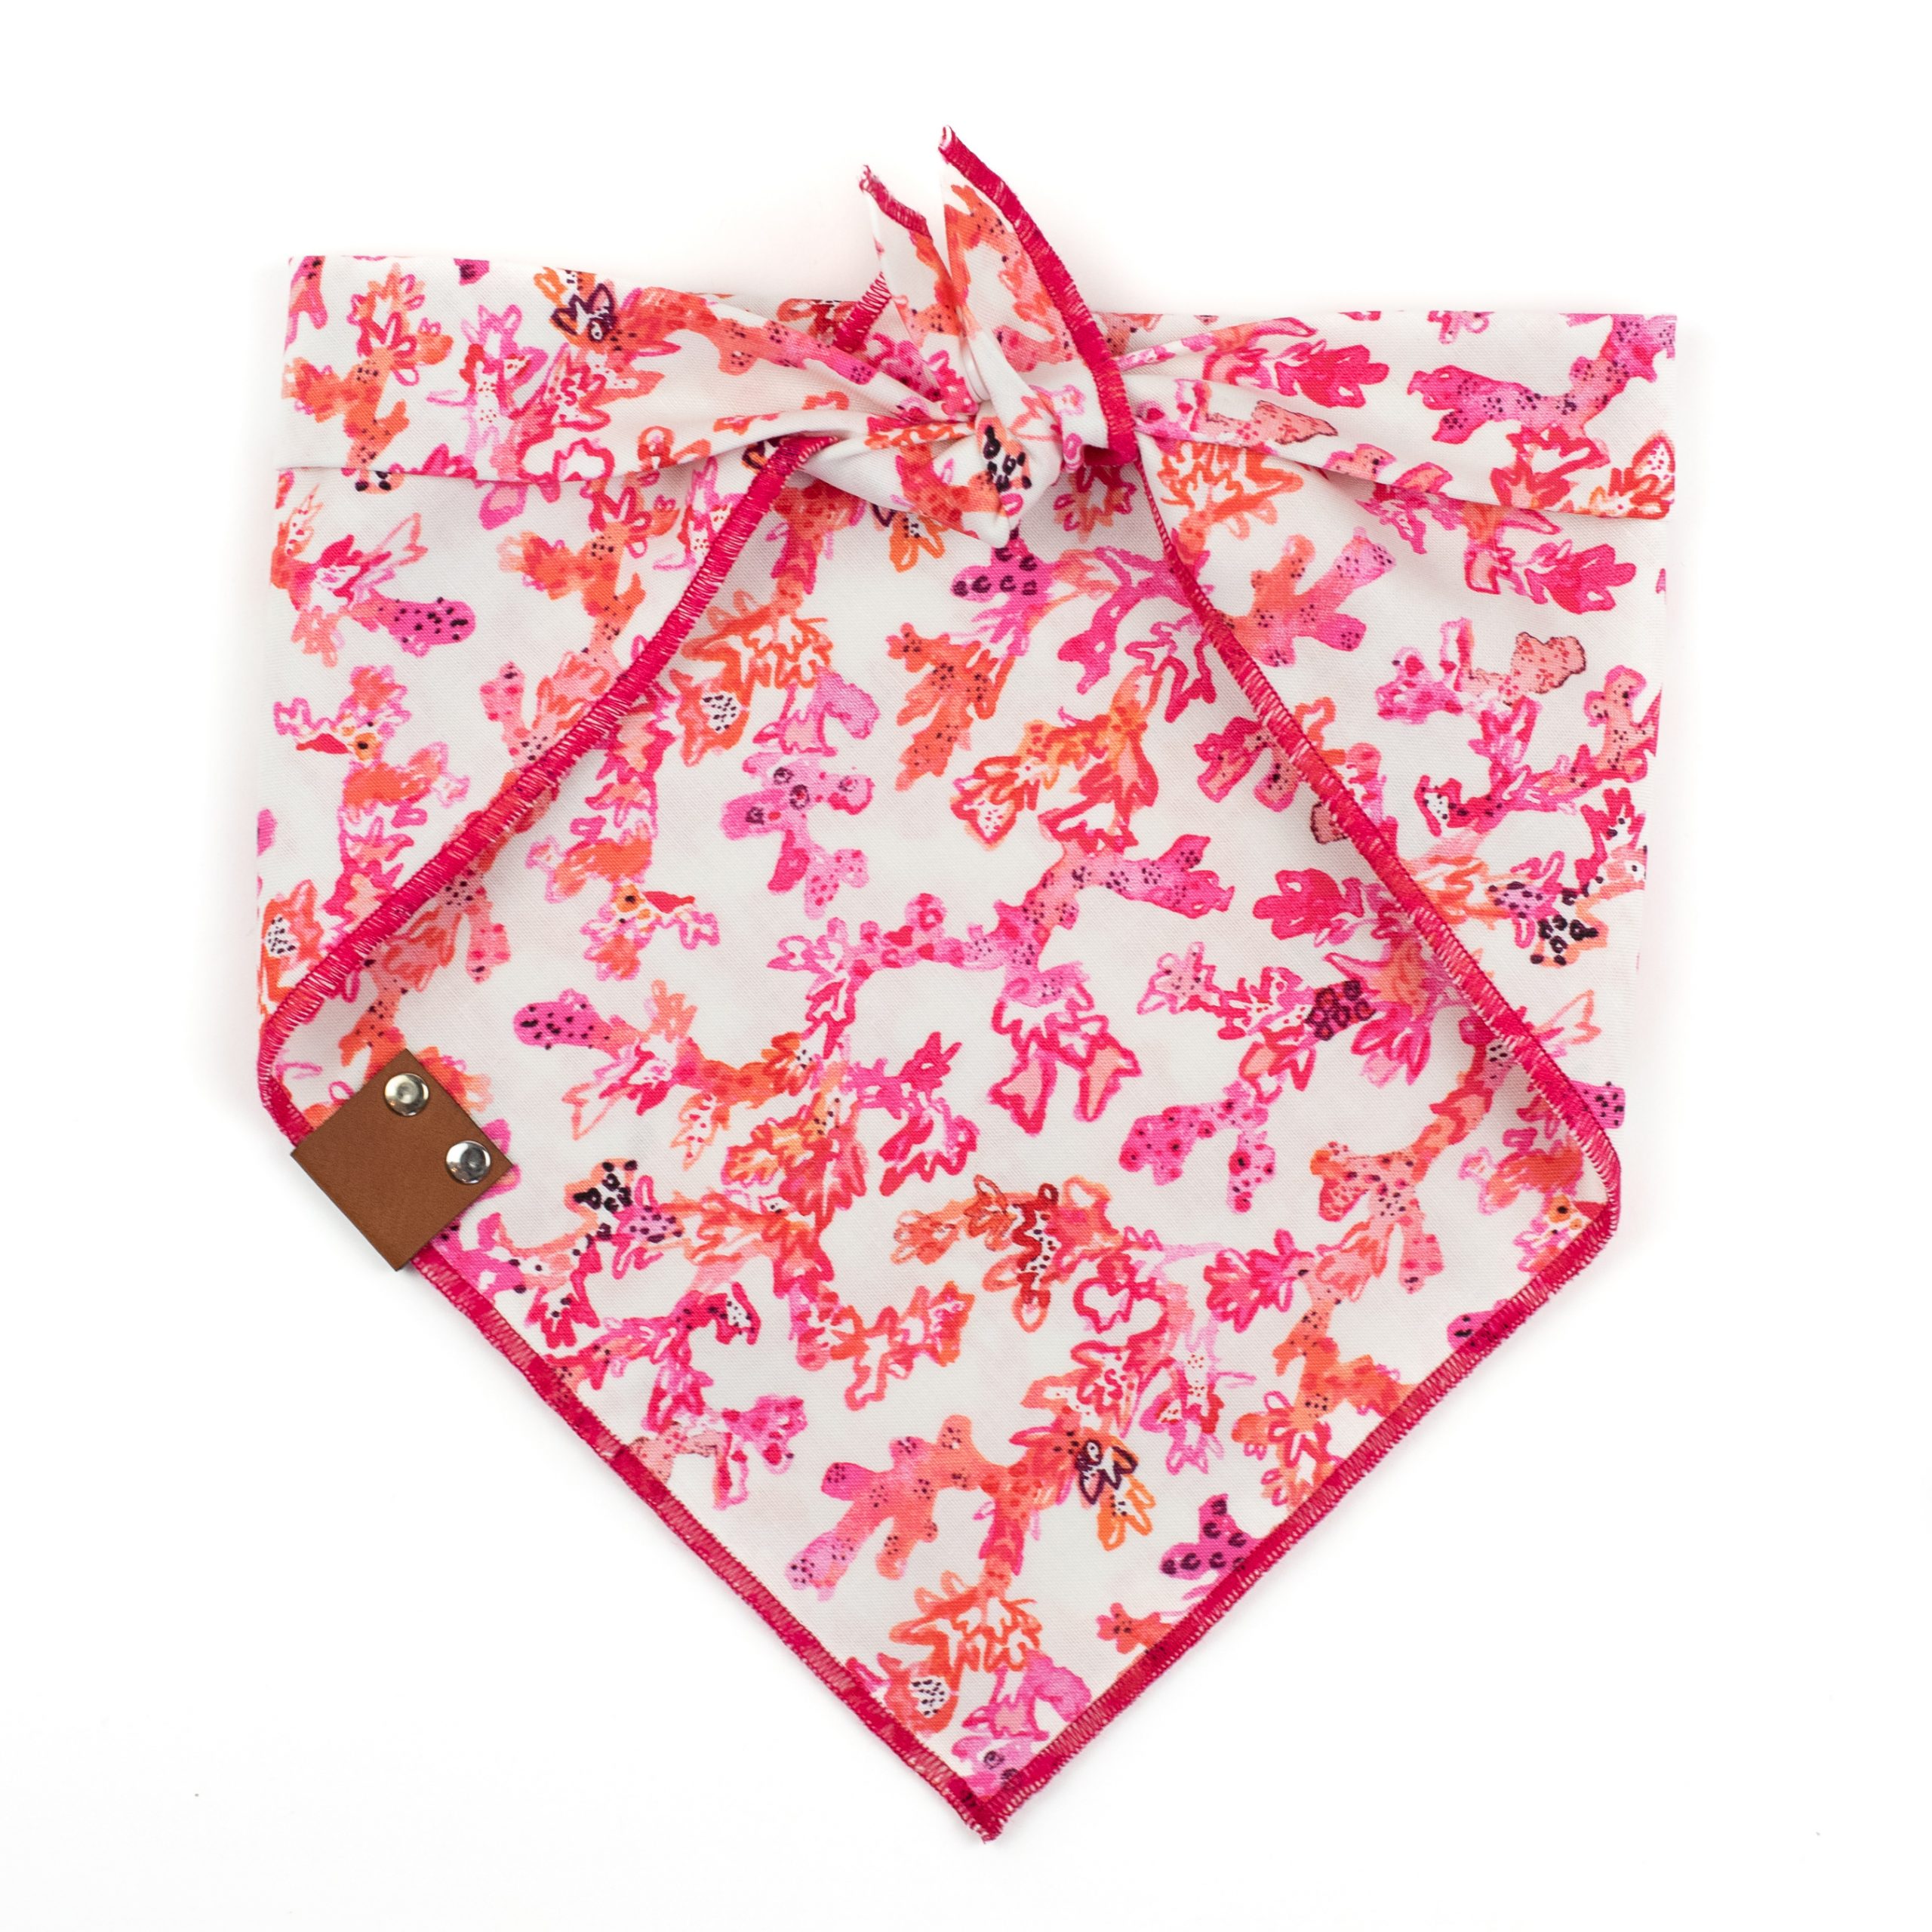 Coral Reef Dog Bandana with a pink, red and orange coral reef pattern